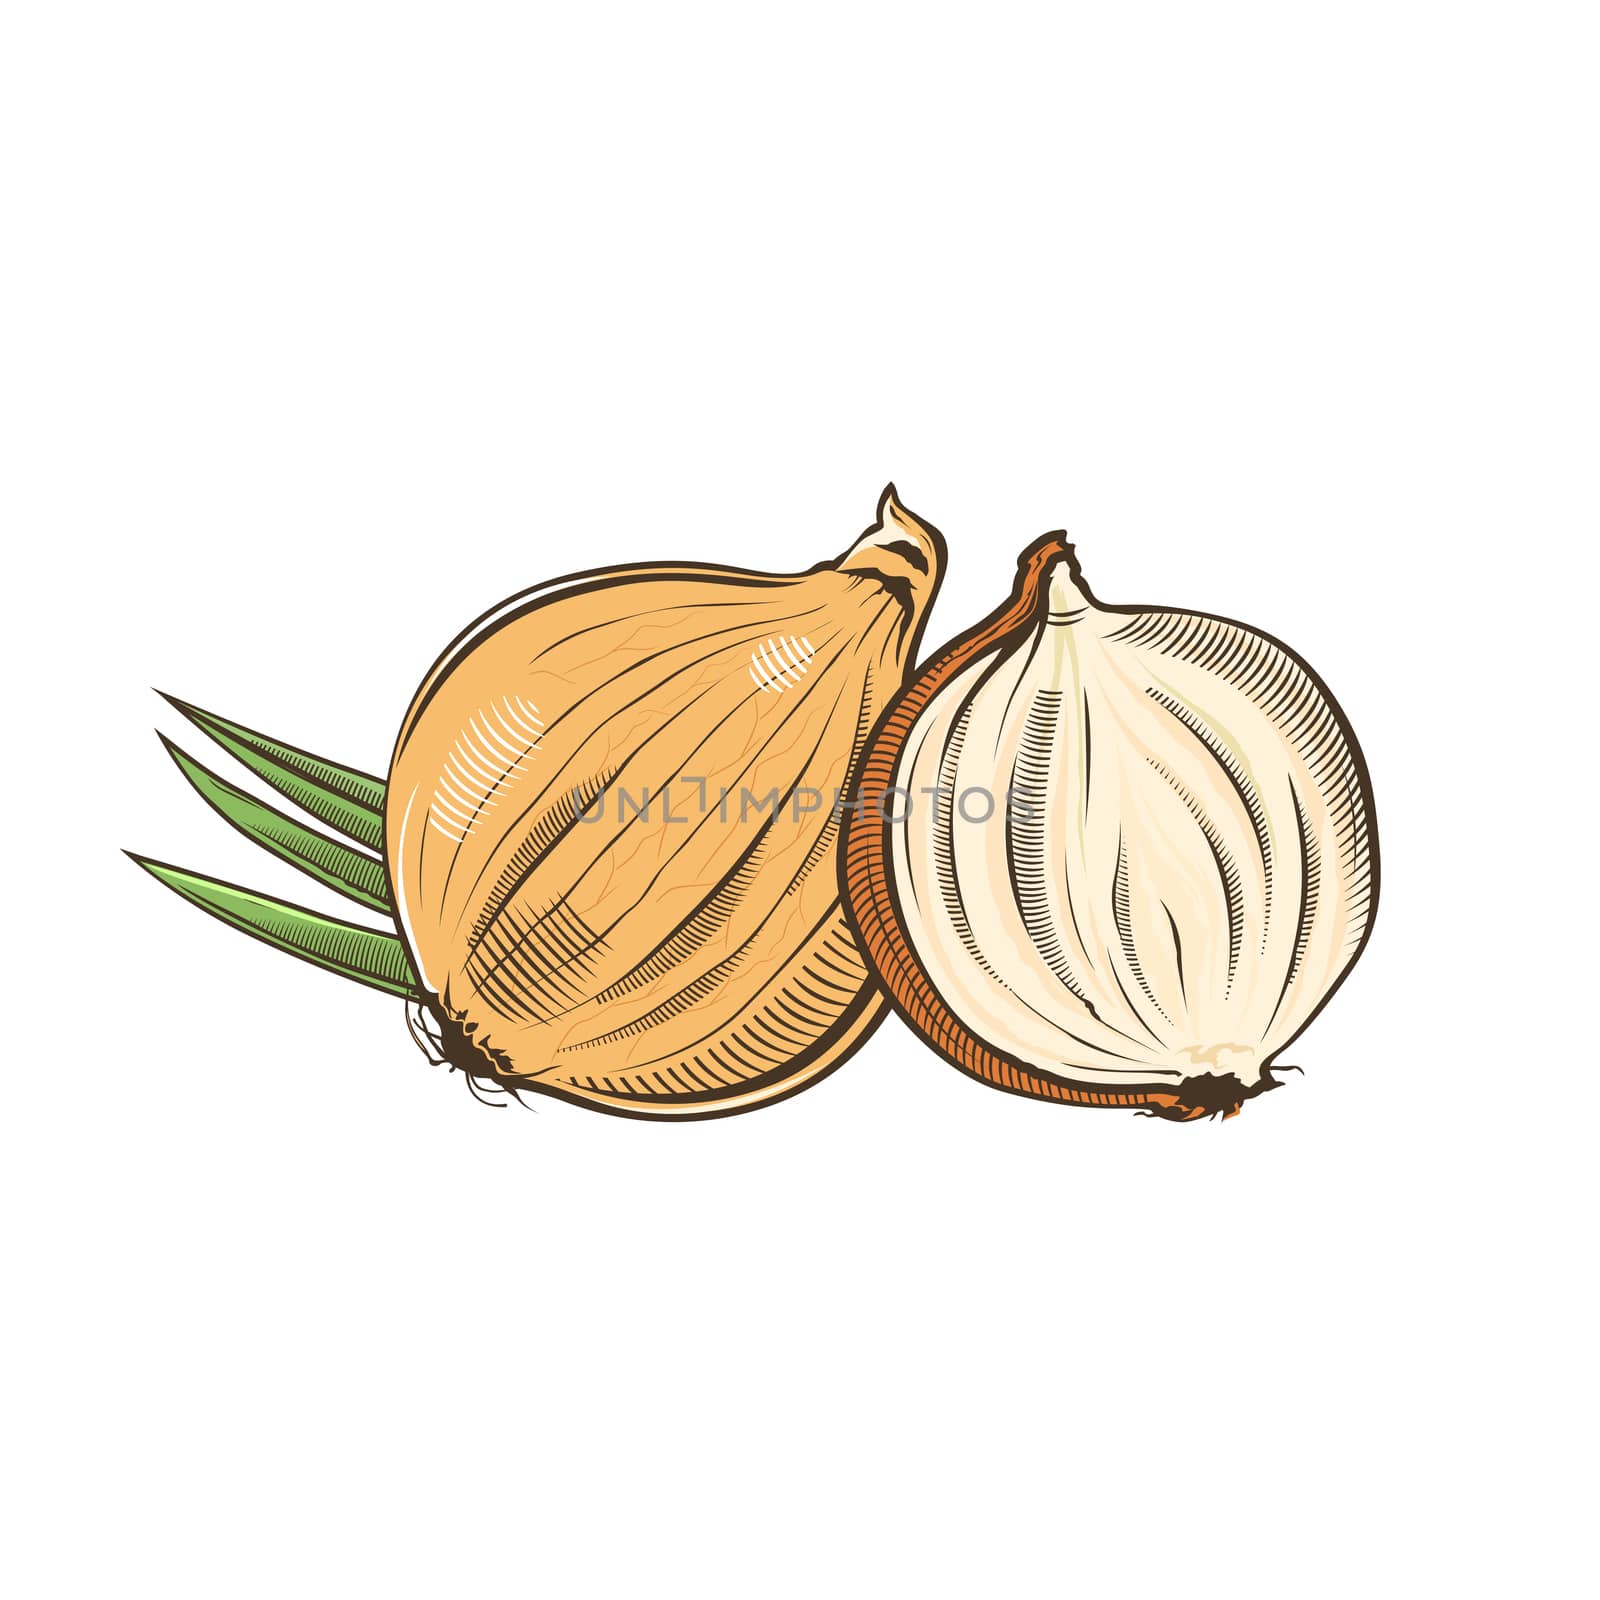 Onion in vintage style by ConceptCafe